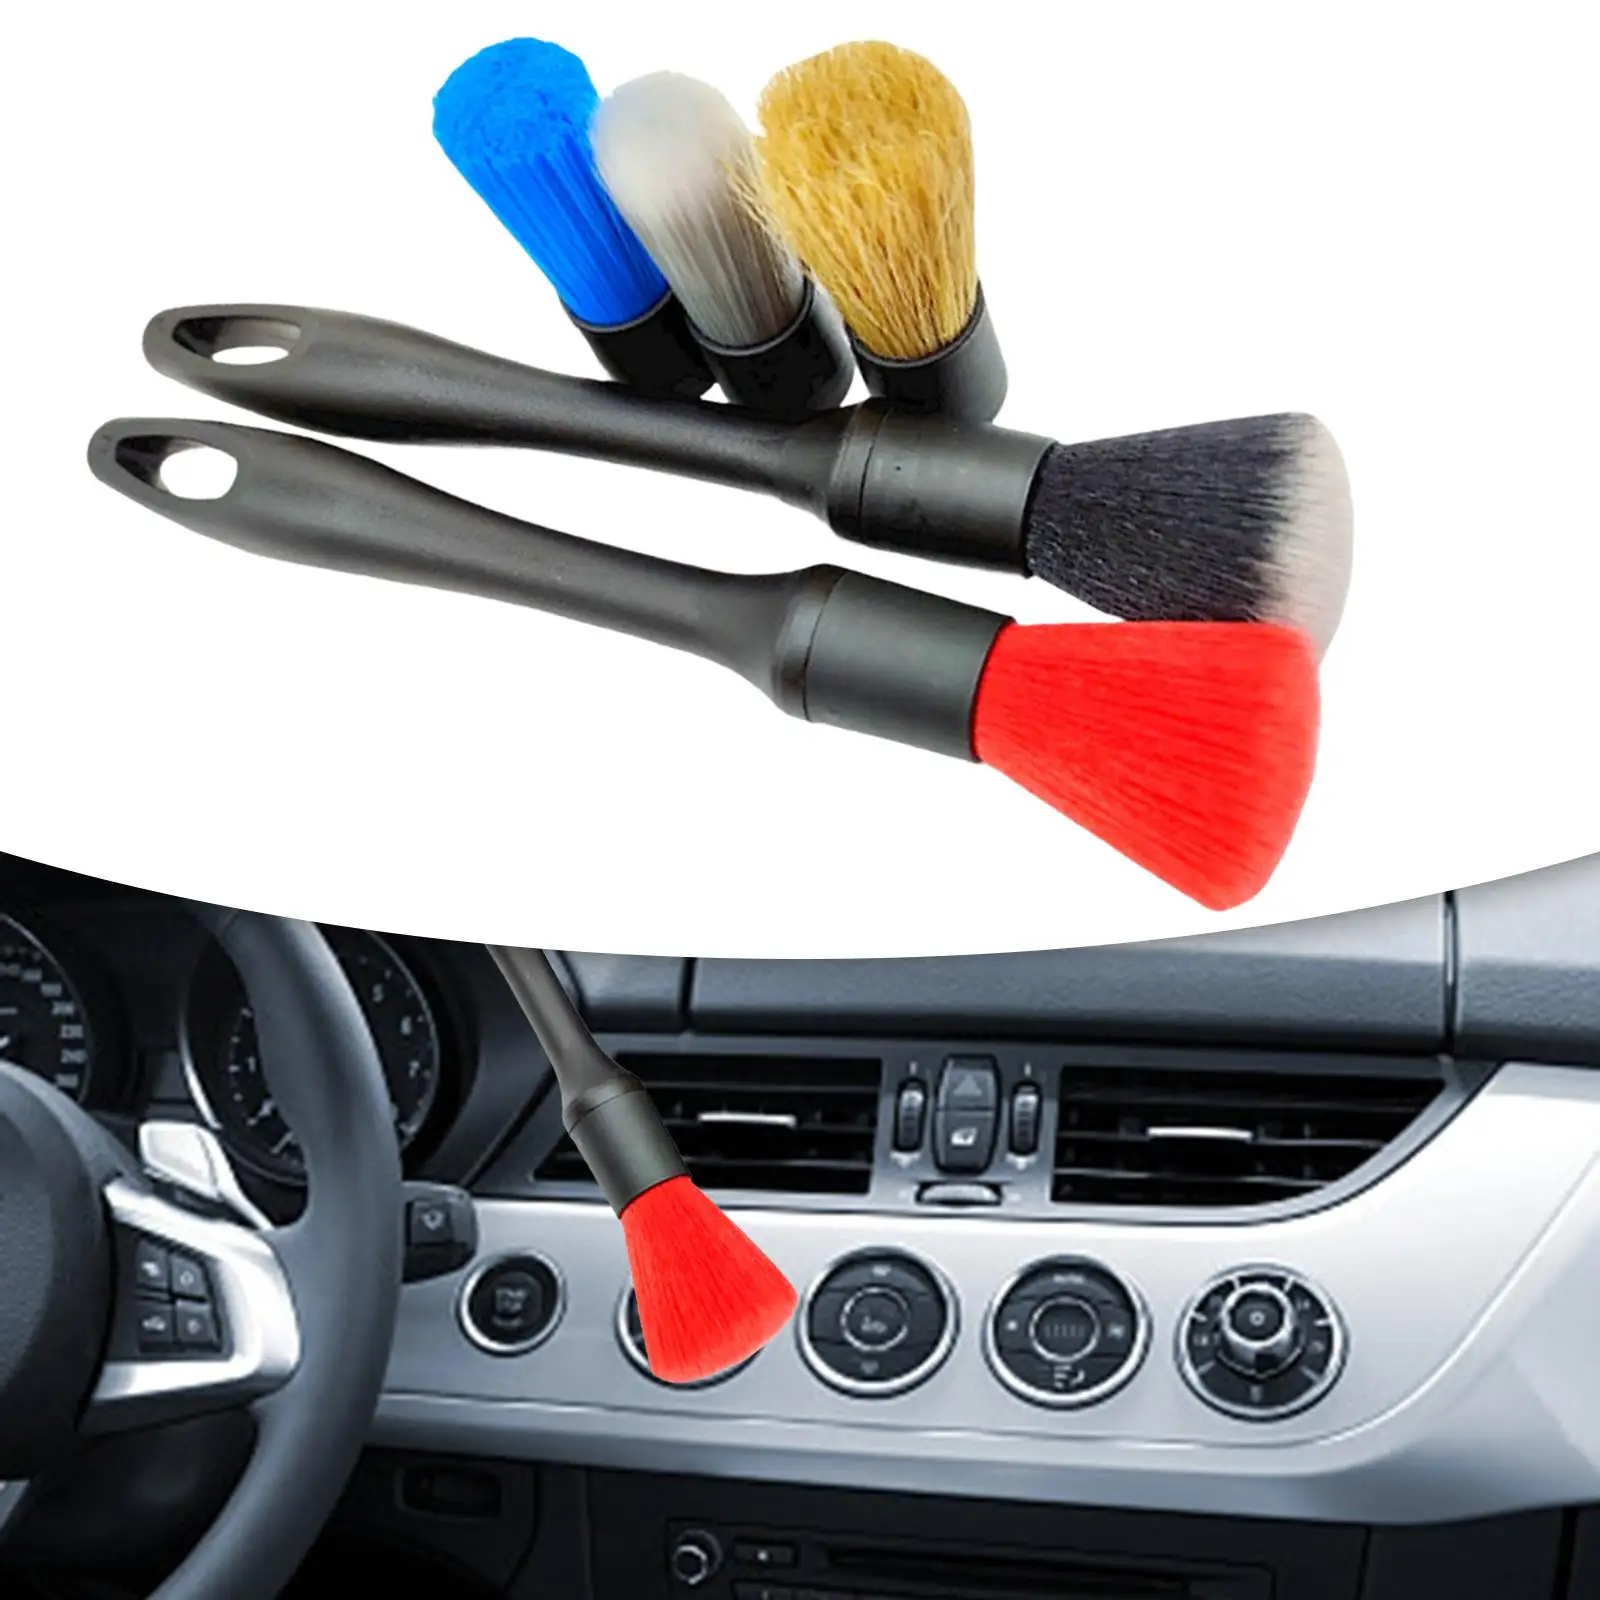 

Detailing Brush Set including 5 Brush Heads 2 Handle for Cleaning Interior Wheels Dashboard Air Conditioner Air Vents